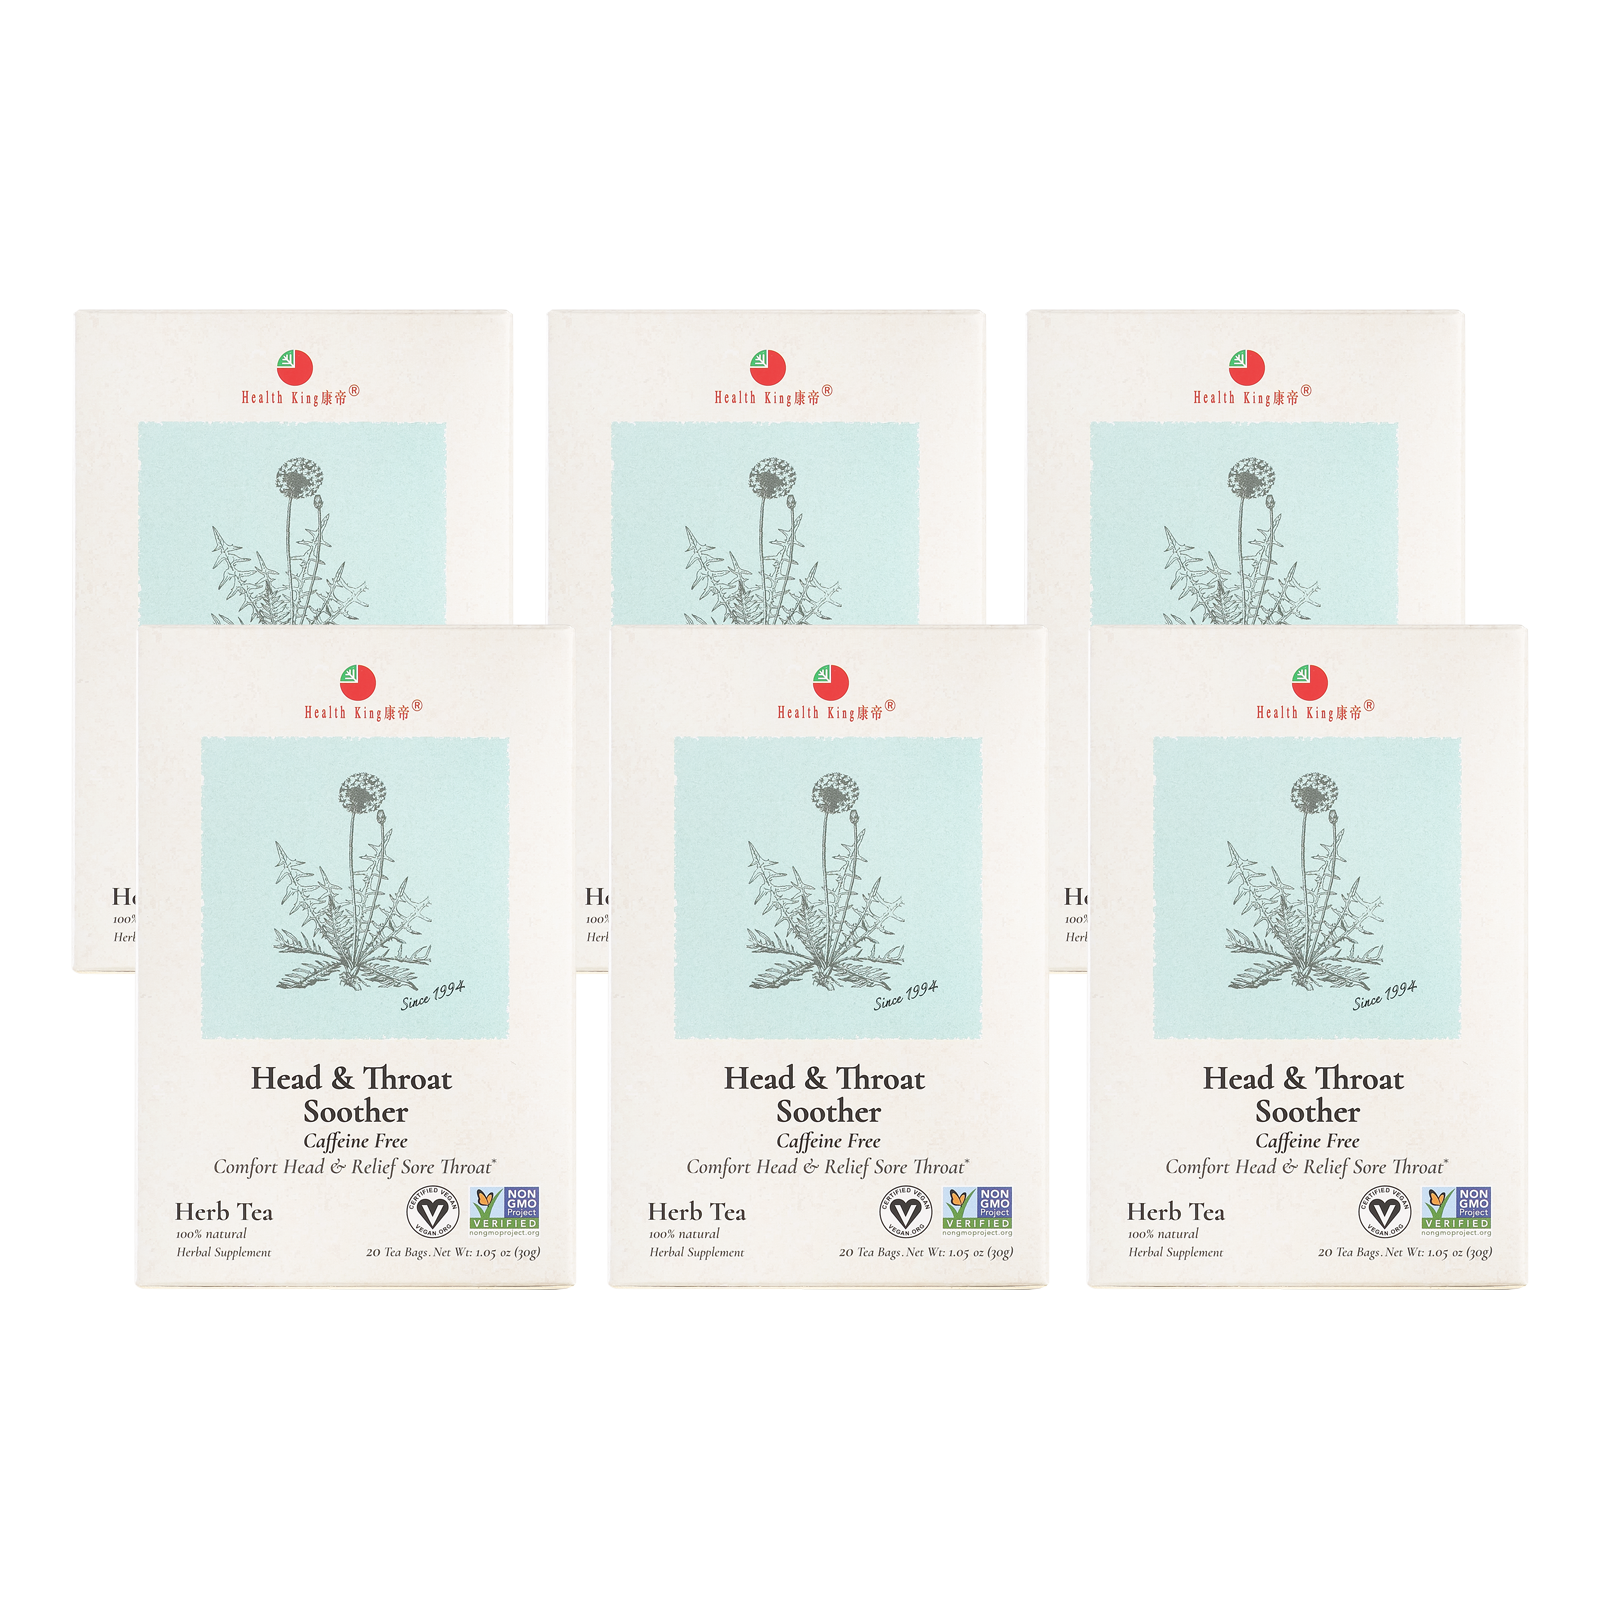 Six packets of Head & Throat Soother Herb Tea on display